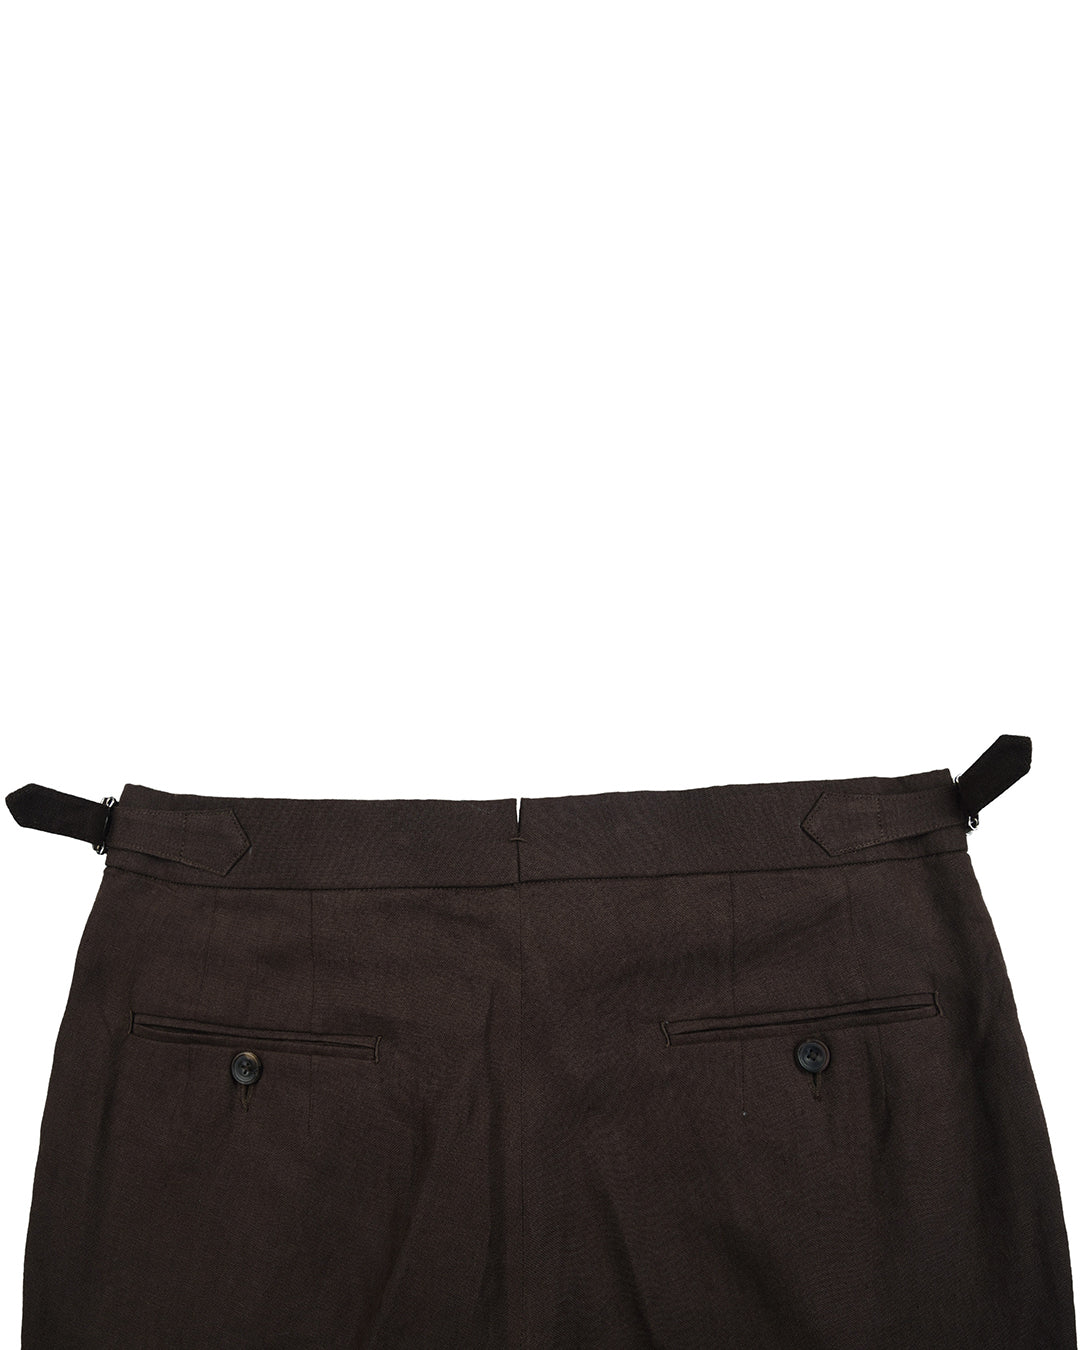 Back view of custom linen pants for men by Luxire in dark brown